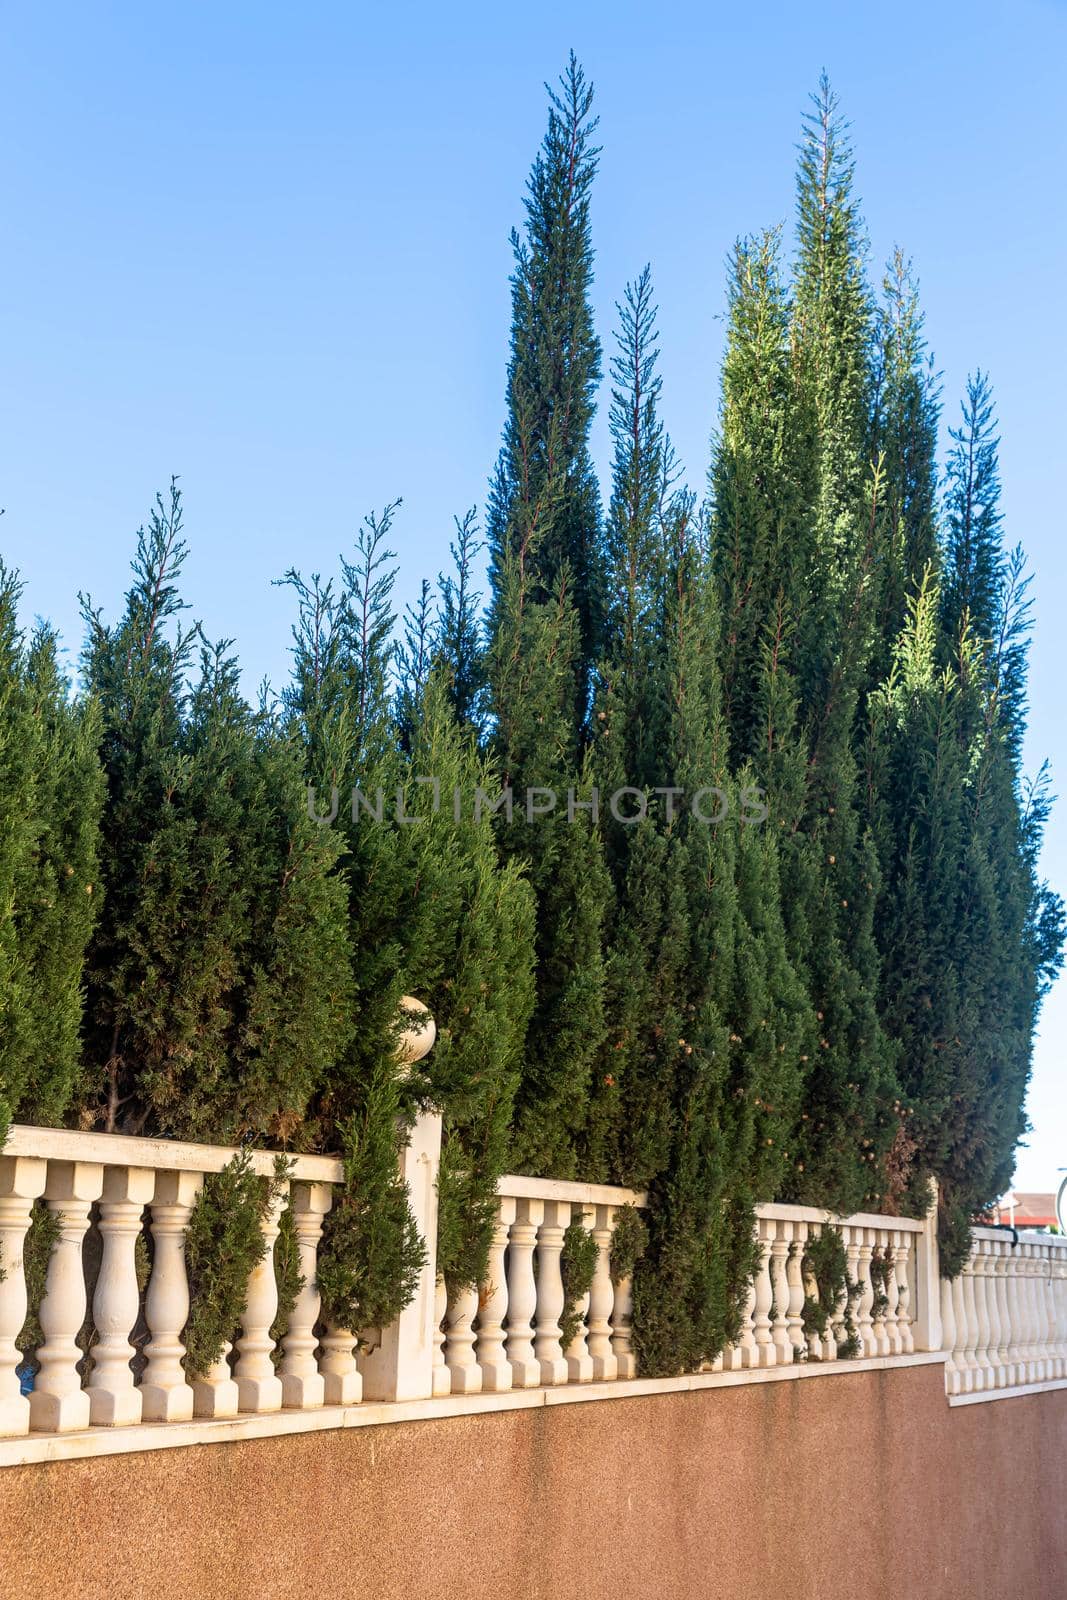 Cypresses grow along the white fence, summer, heat